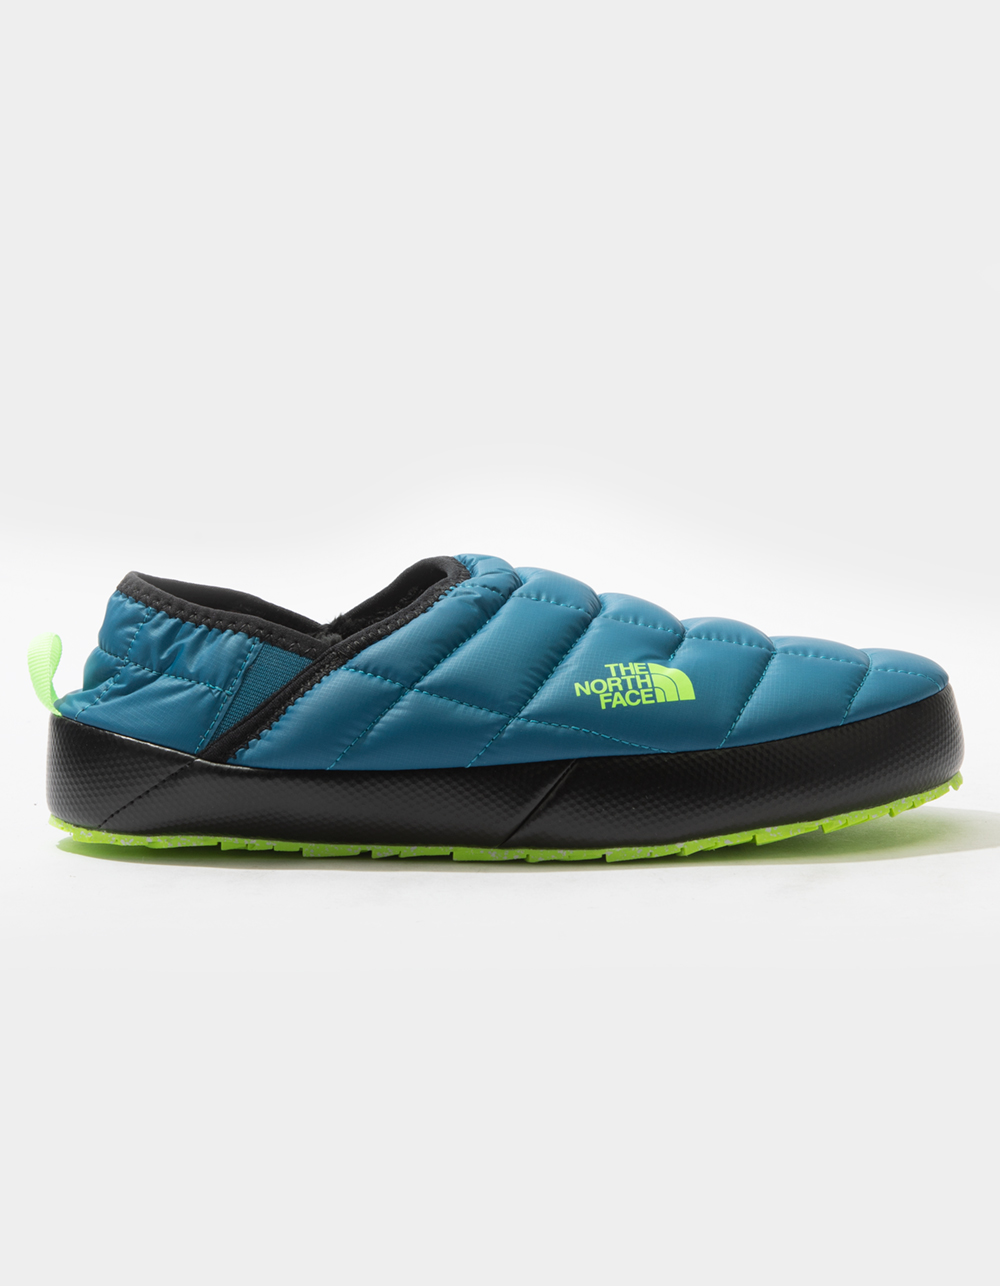 THE NORTH FACE Thermoball™ Traction V Mens Mule Shoes - BLUE COMBO | Tillys